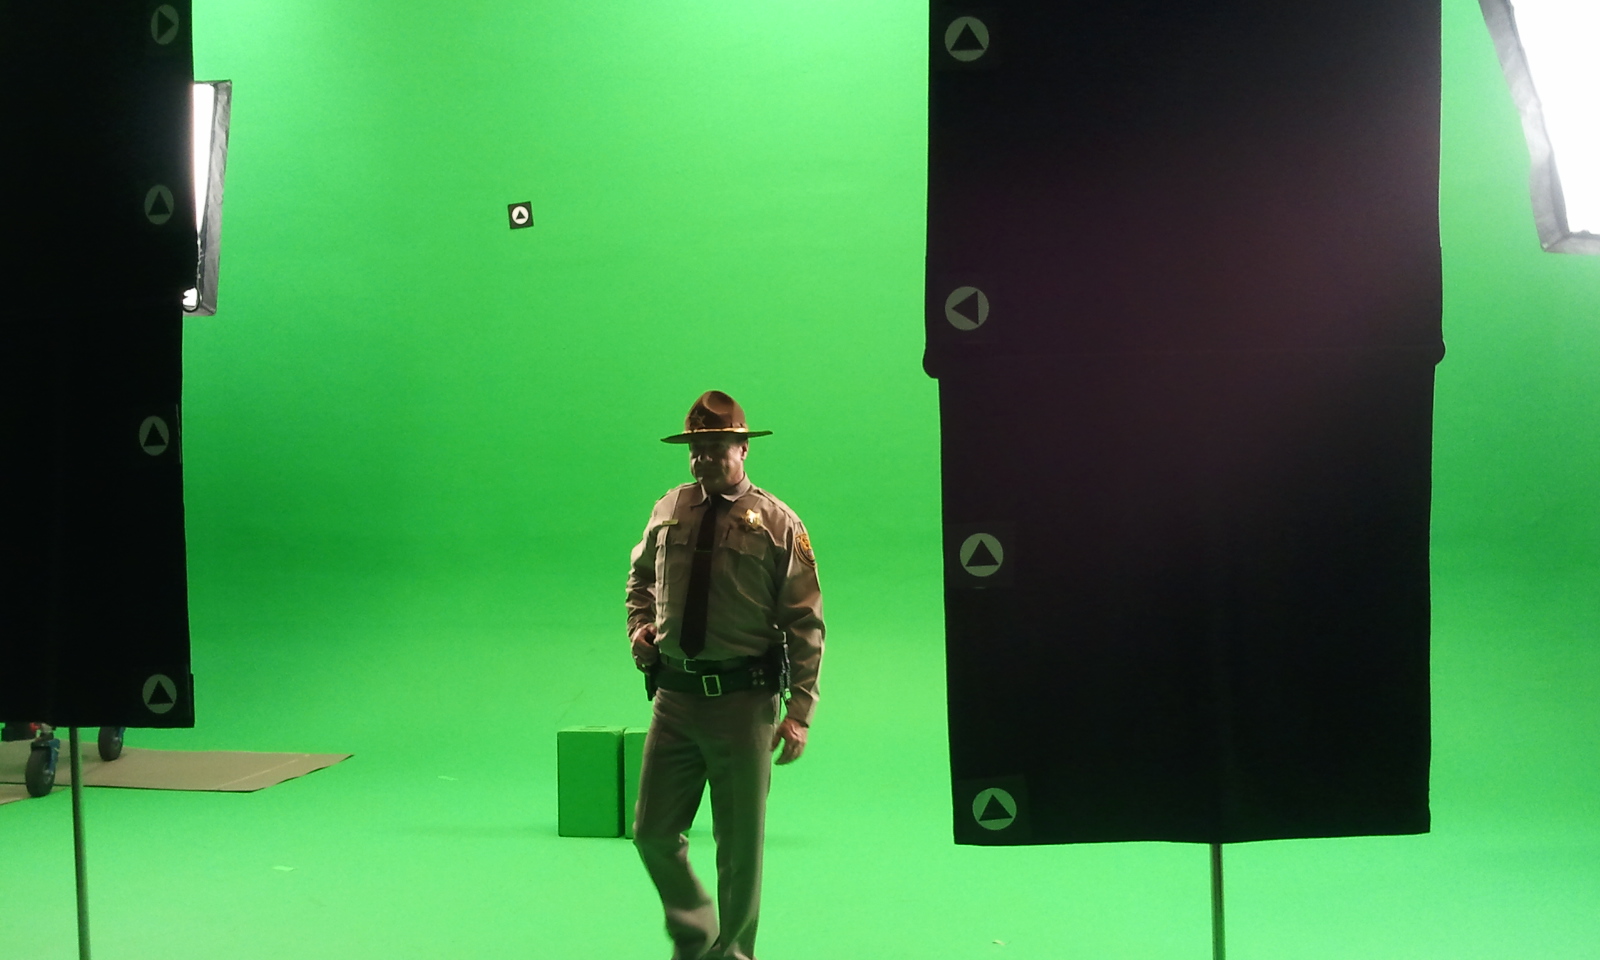 Green screen? How bout green SOUNDSTAGE!